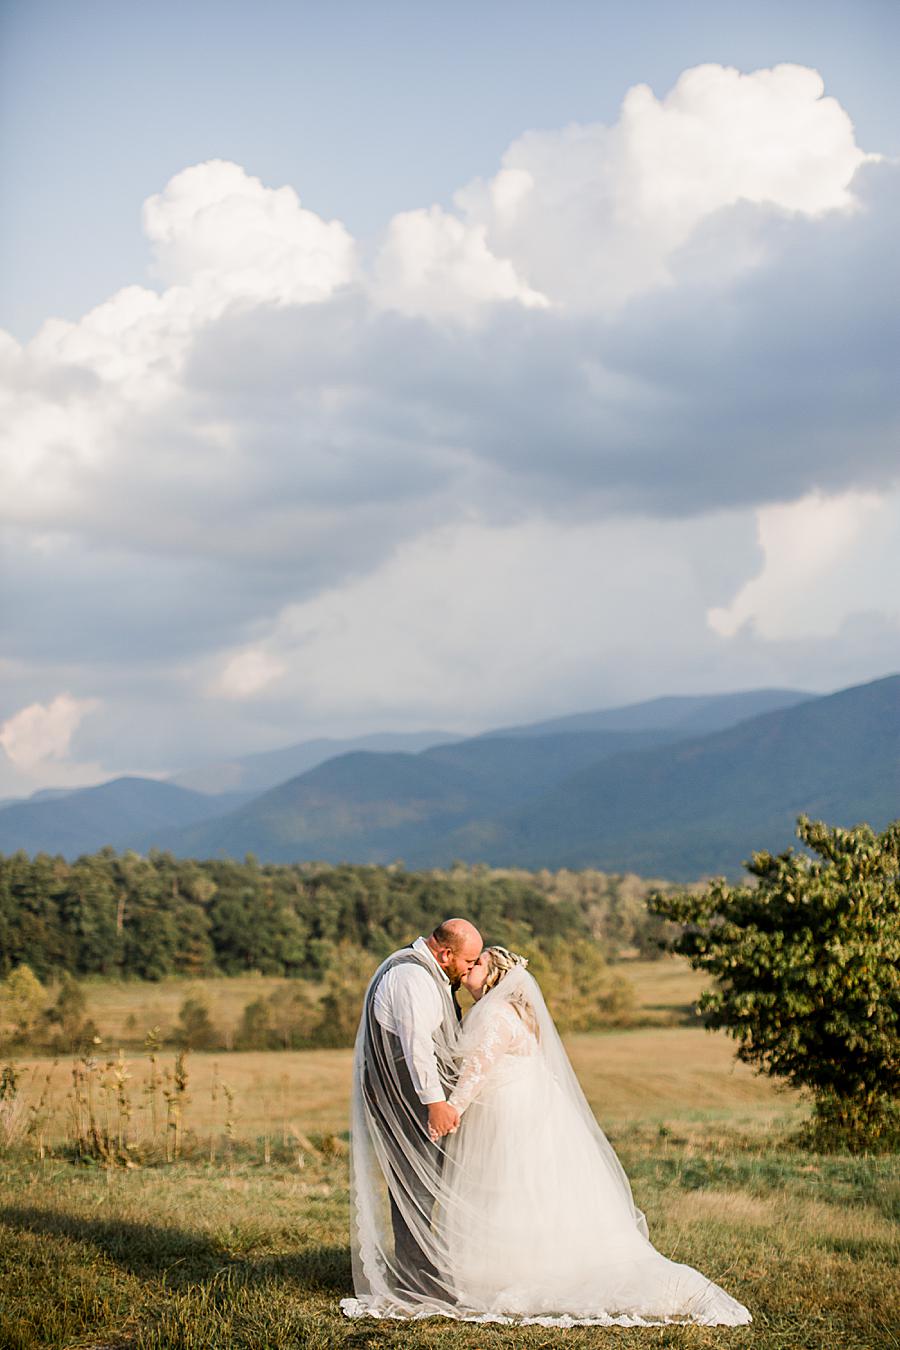 Stormy skies by Knoxville Wedding Photographer, Amanda May Photos.